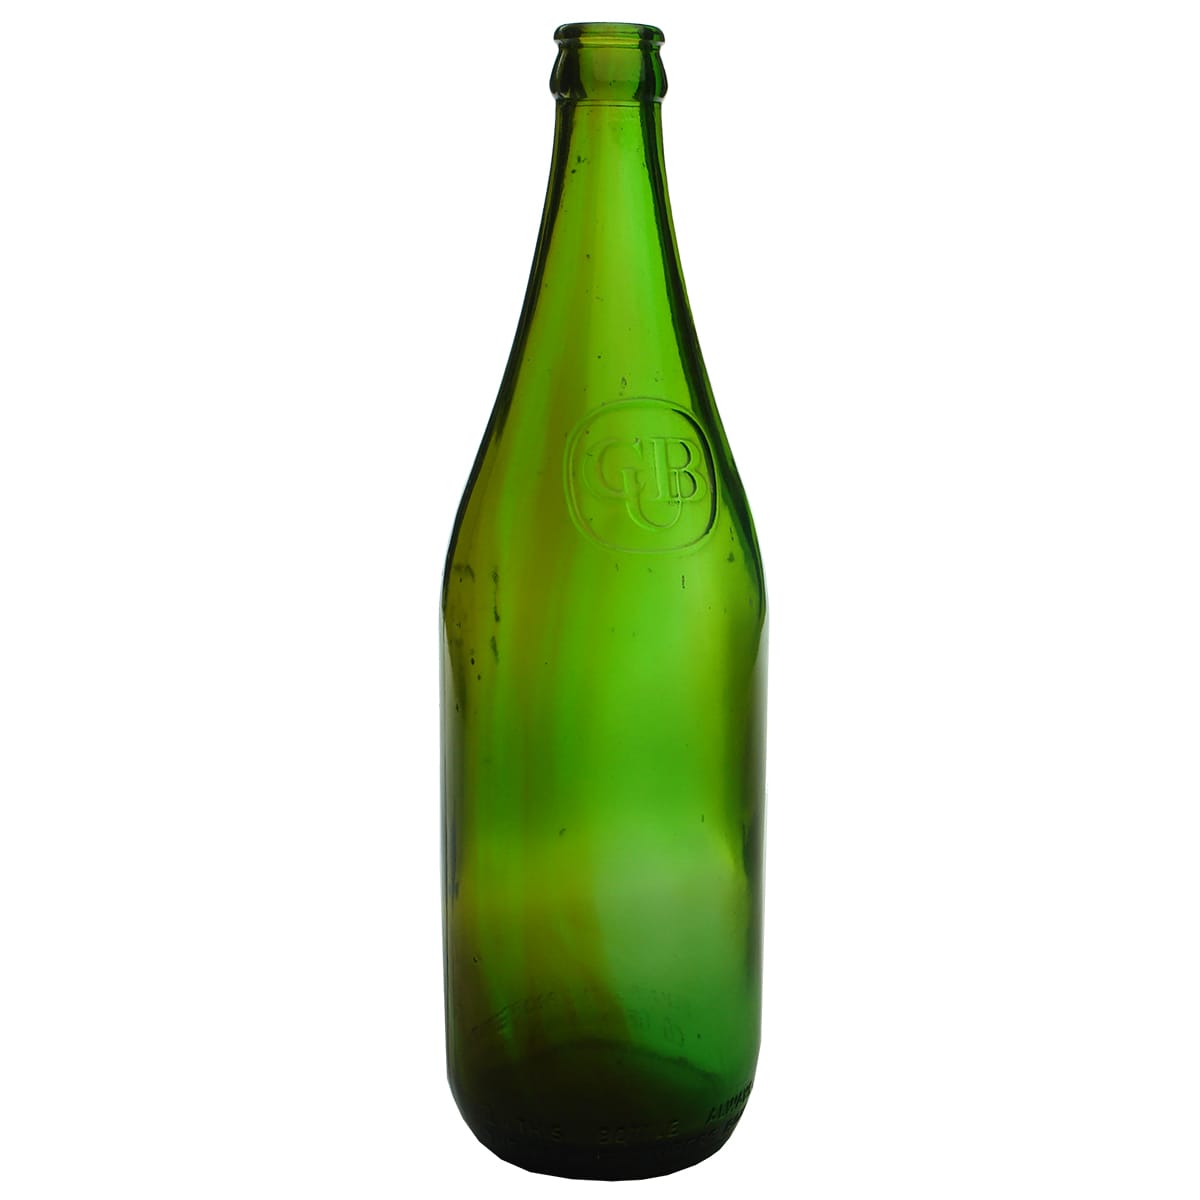 Beer. CUB. Manufacturers Bottle Company of Victoria. Green! 26 oz. Crown Seal. (Victoria)